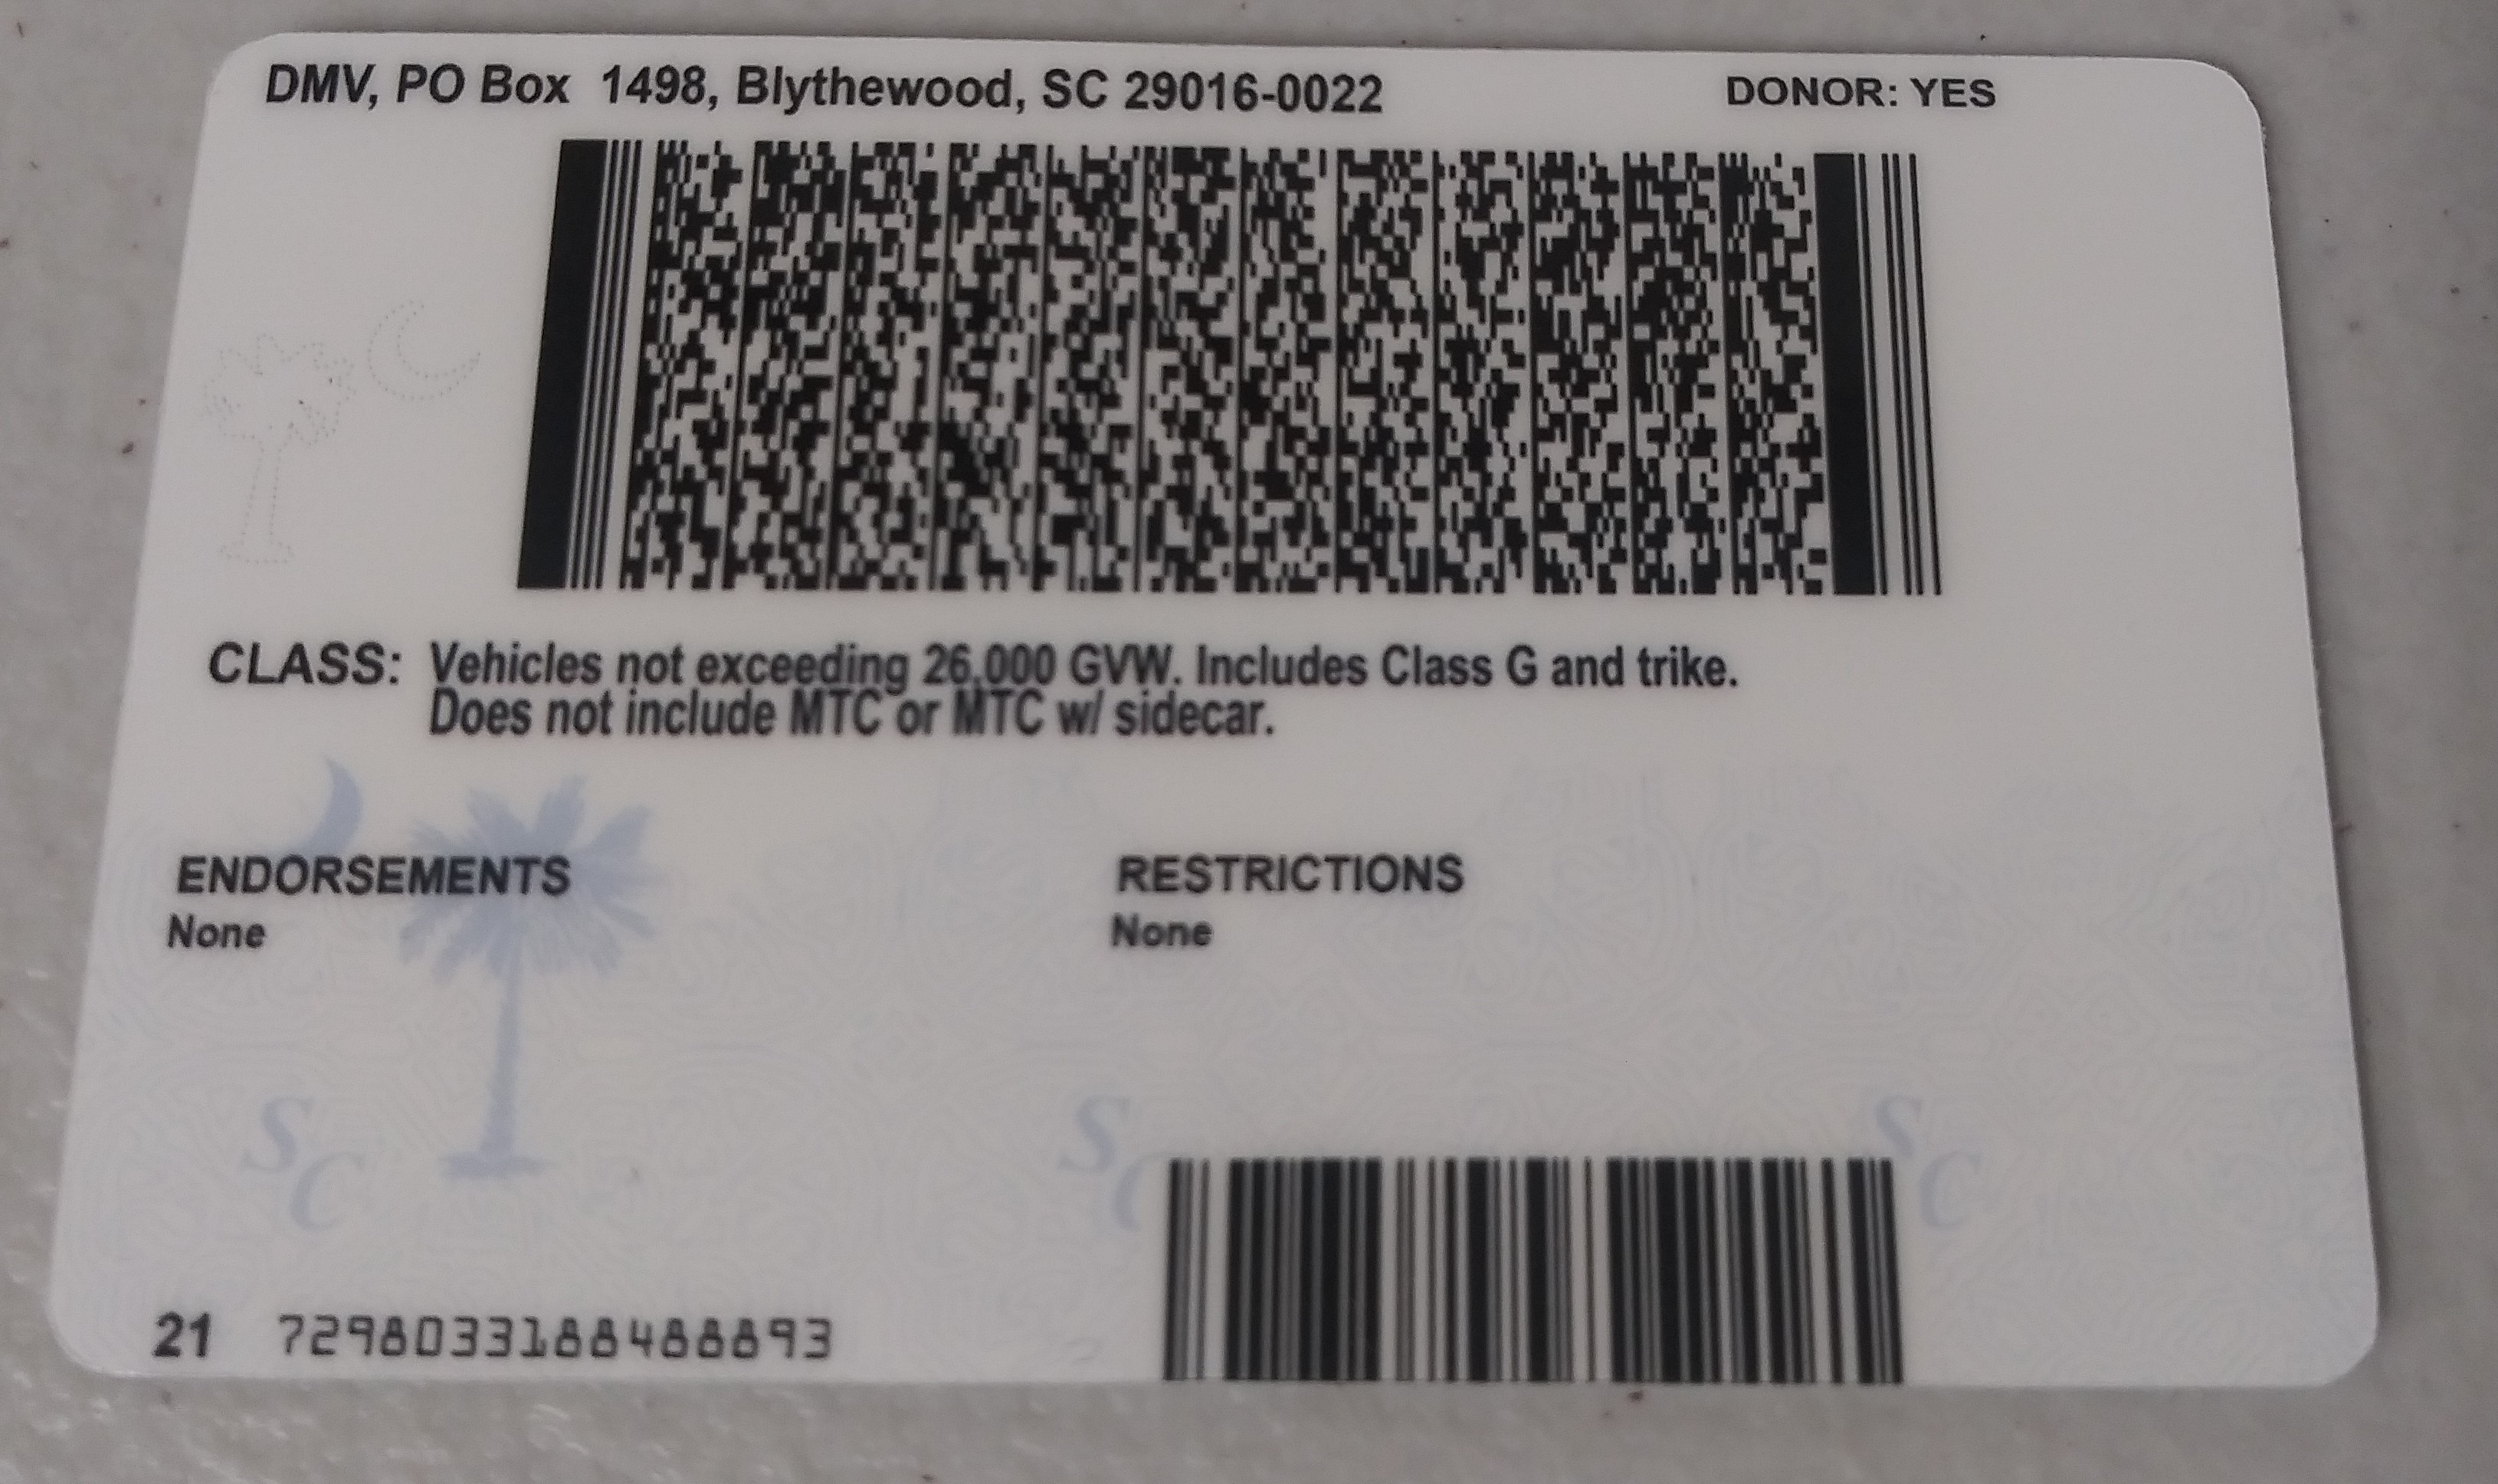 what state issued barcode driver licenses